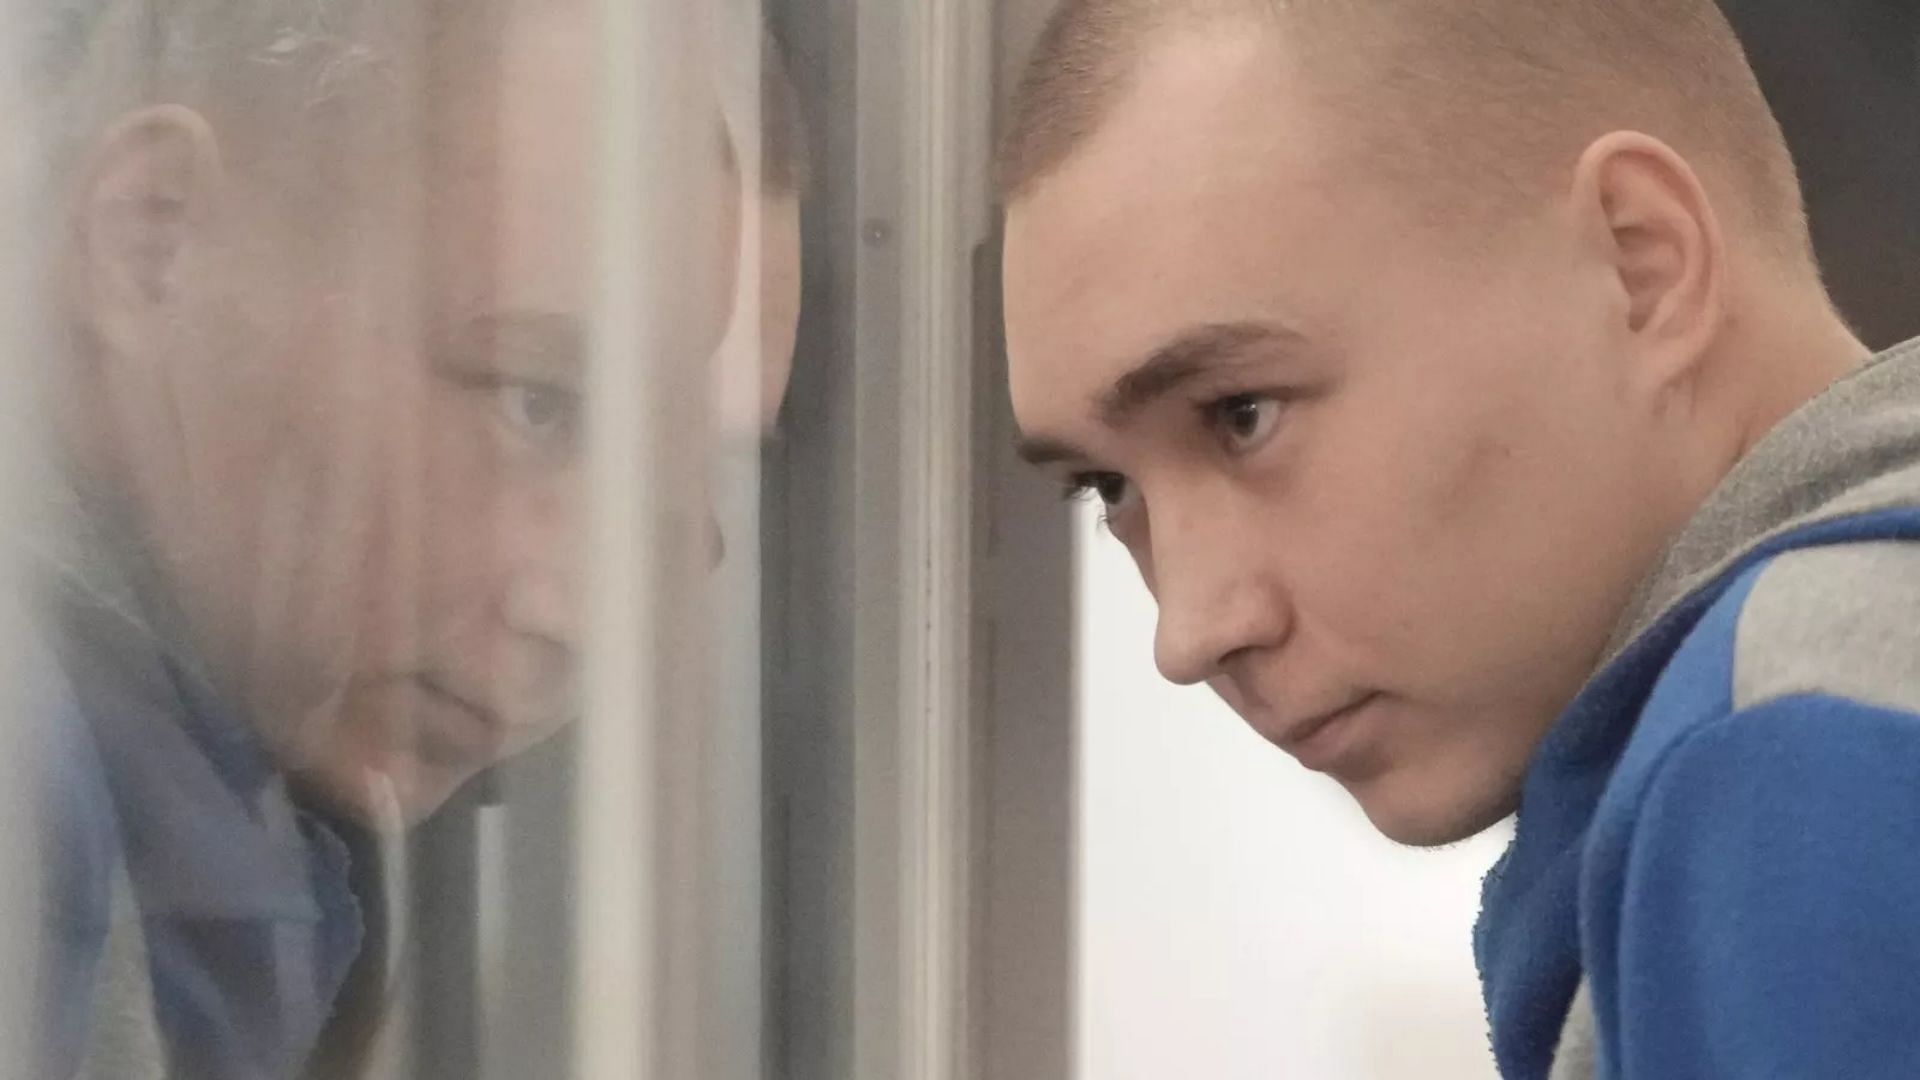 Russian Sergeant Vadim Shishimarin appears at a sentencing hearing on May 23, 2022, in Kyiv, Ukraine. (Image via Christopher Furlong/Getty Images)